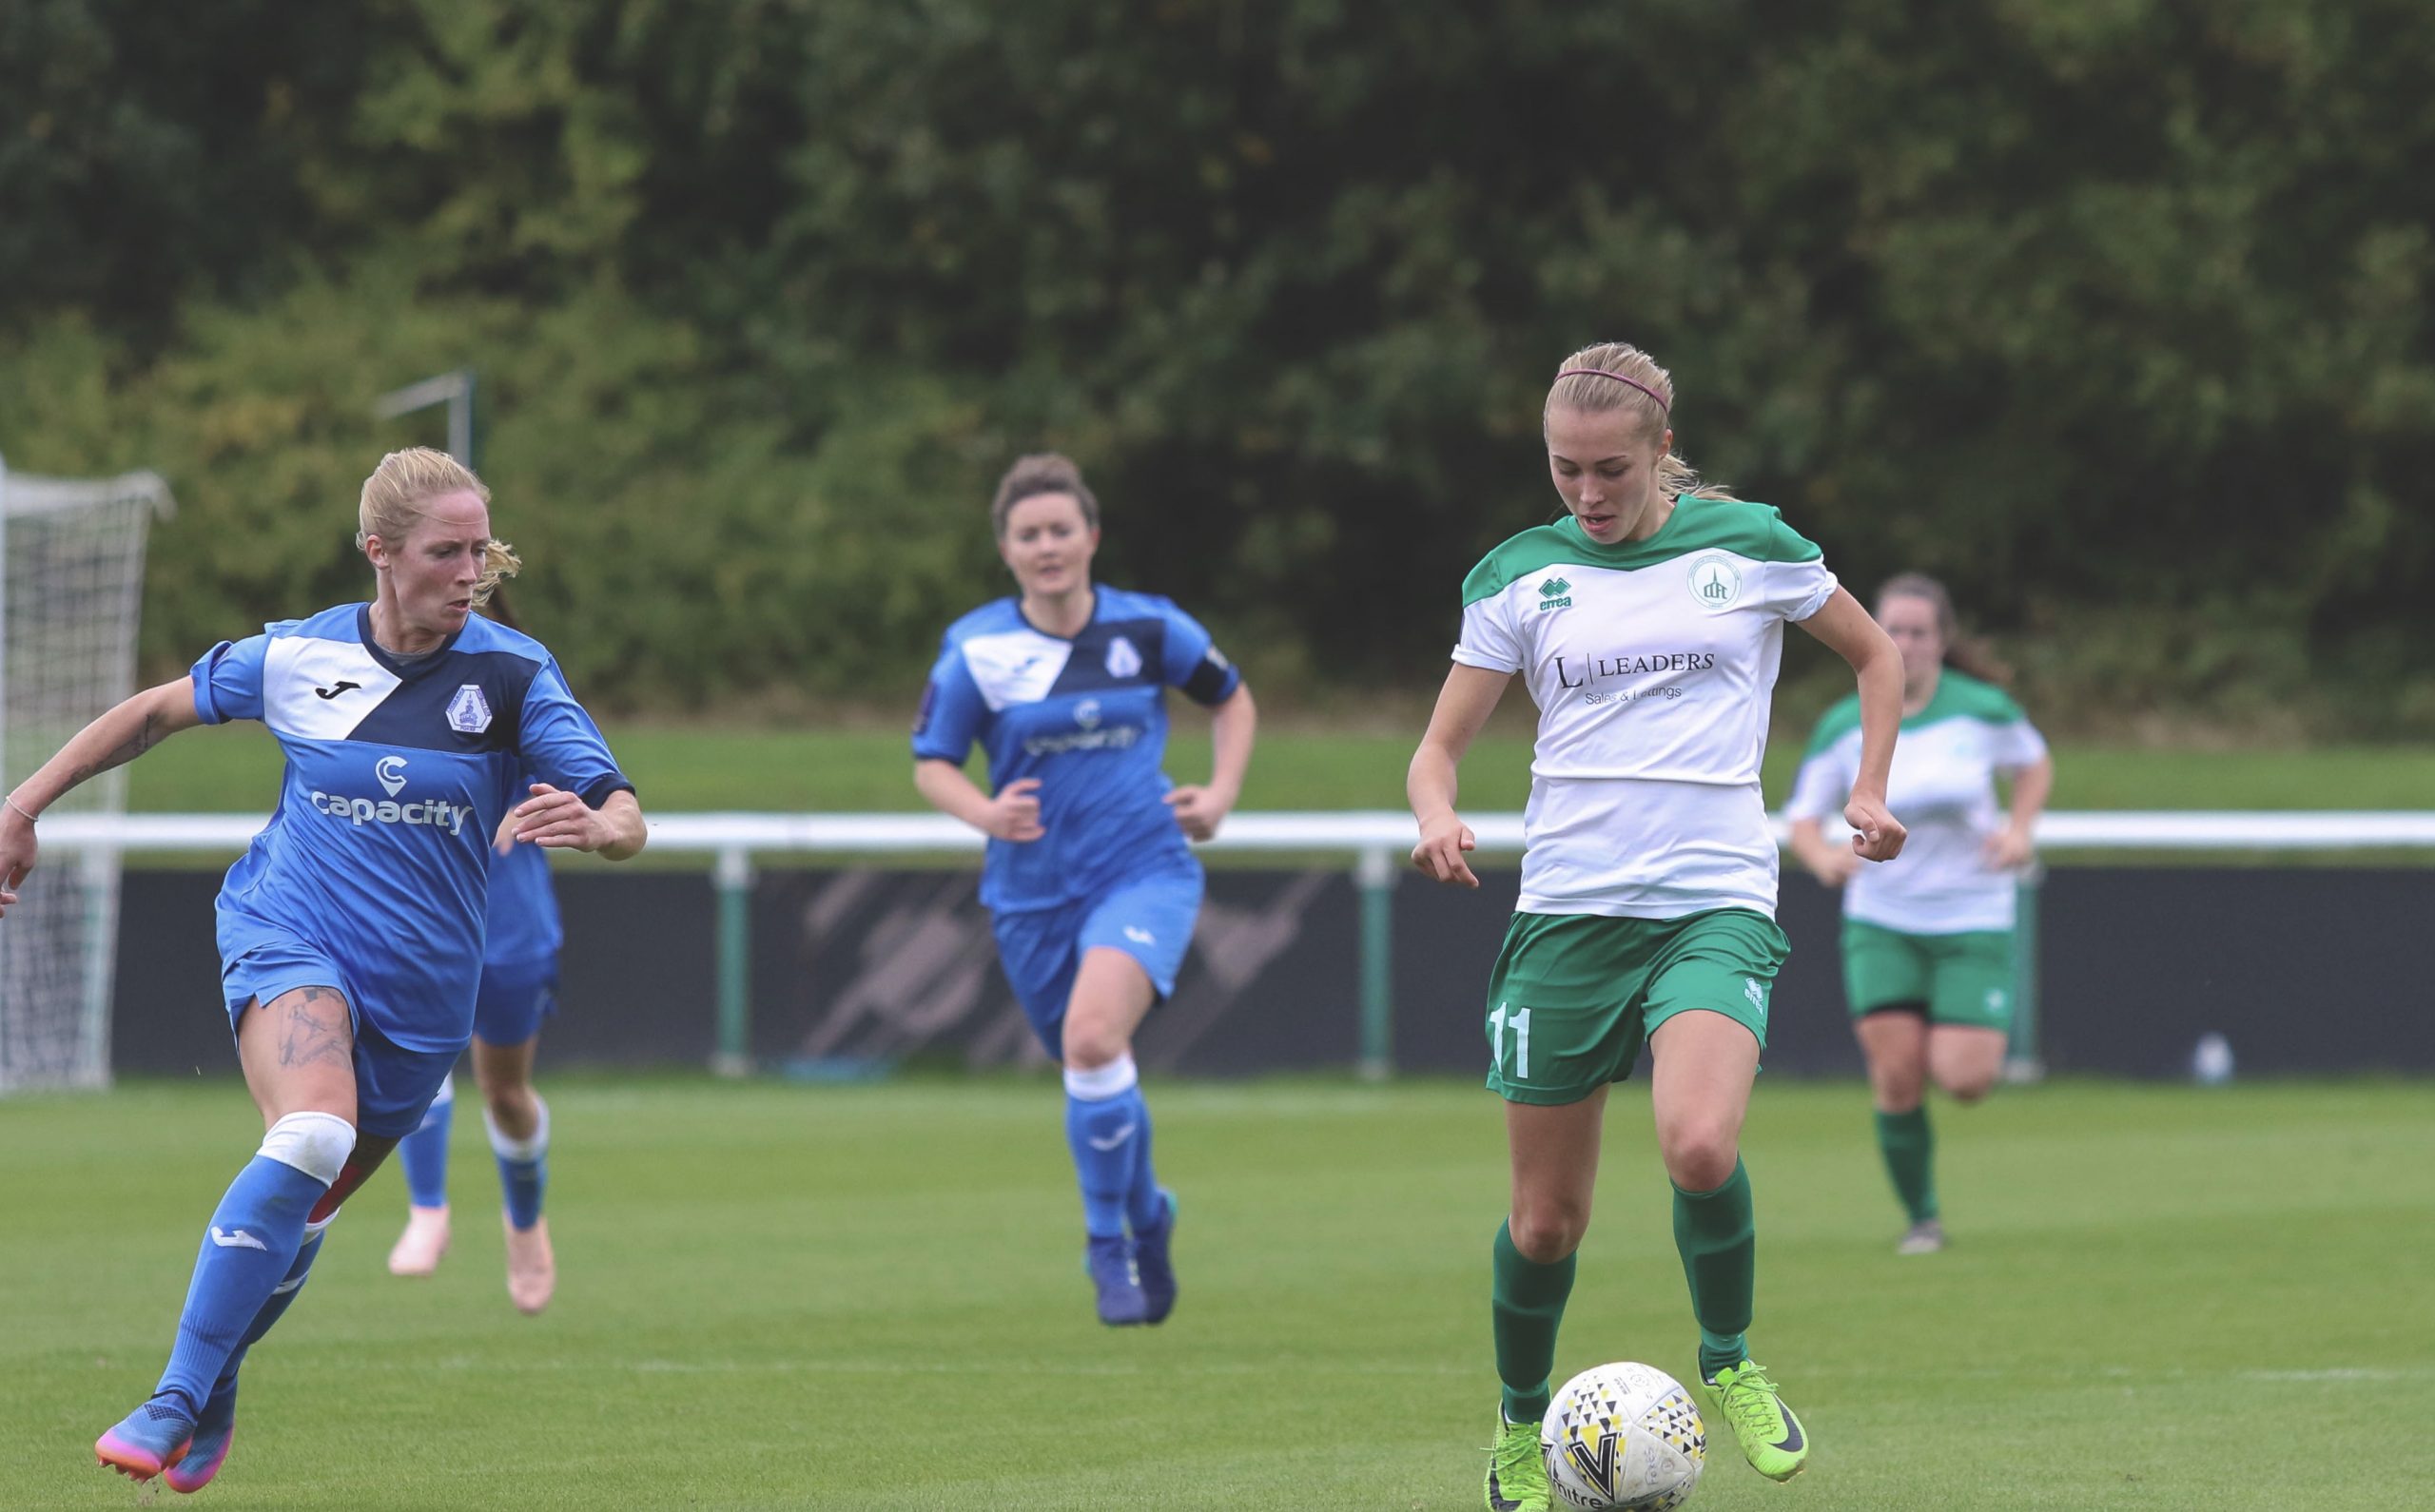 Tash Stephens at Loughborough Foxes 0-1 Chichester City Ladies (30.09.18) Photo by Sheena Booker